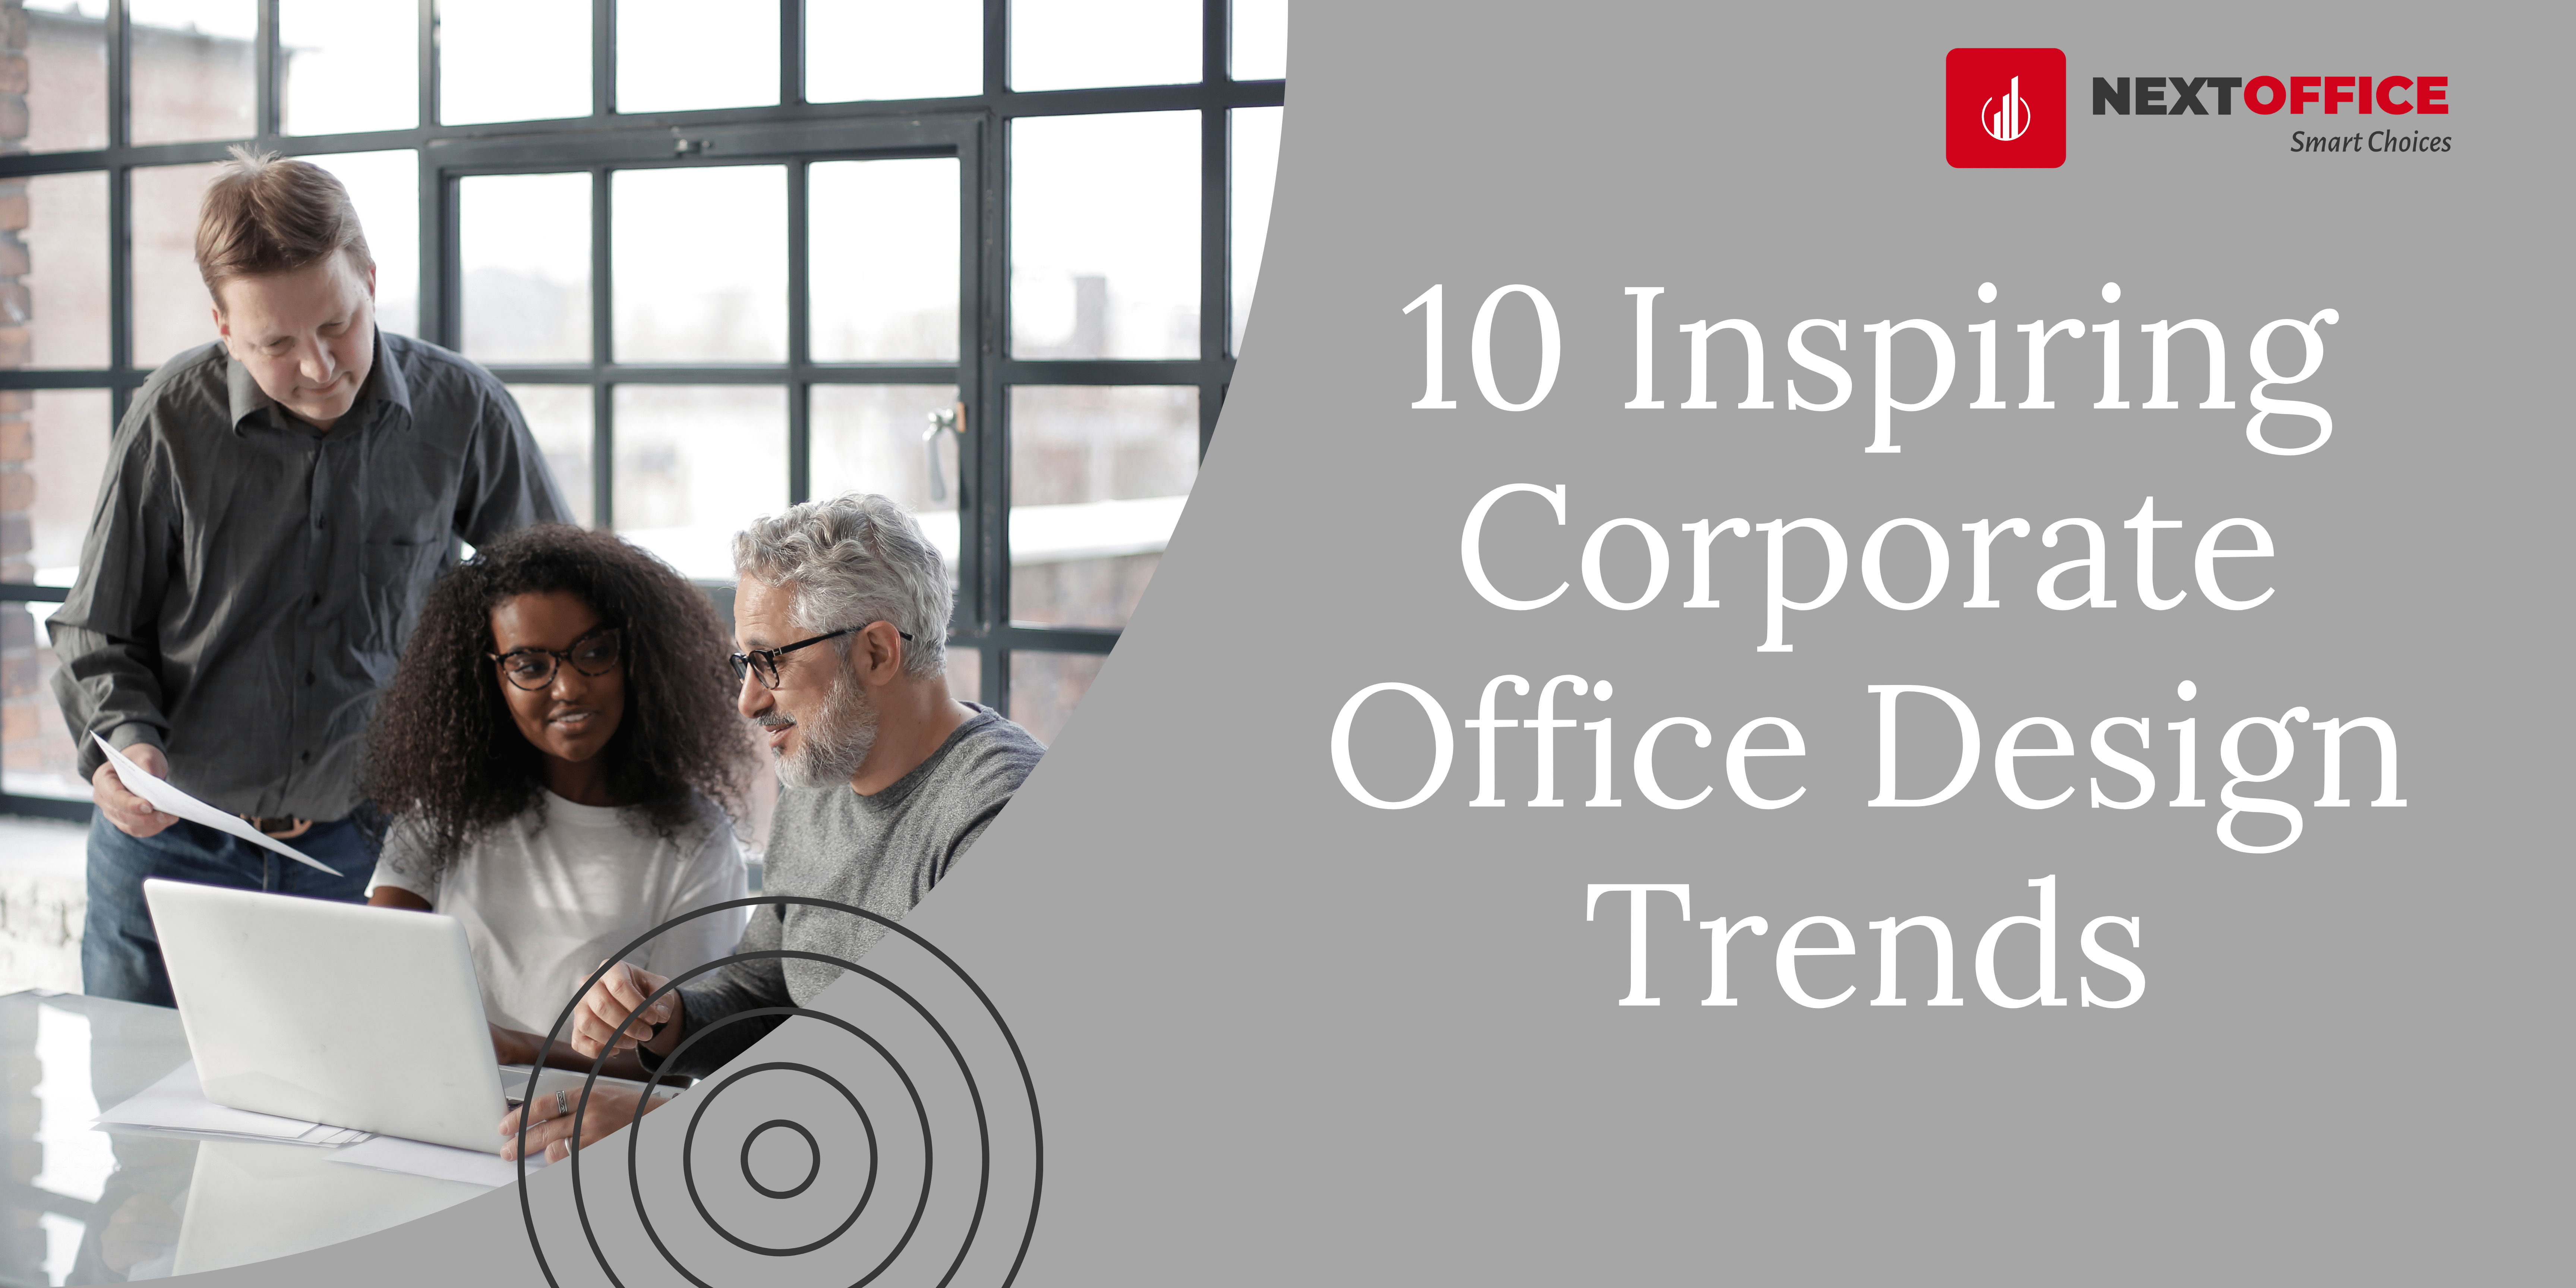 10 Inspiring Corporate Office Design Trends to Boost Workplace Productivity